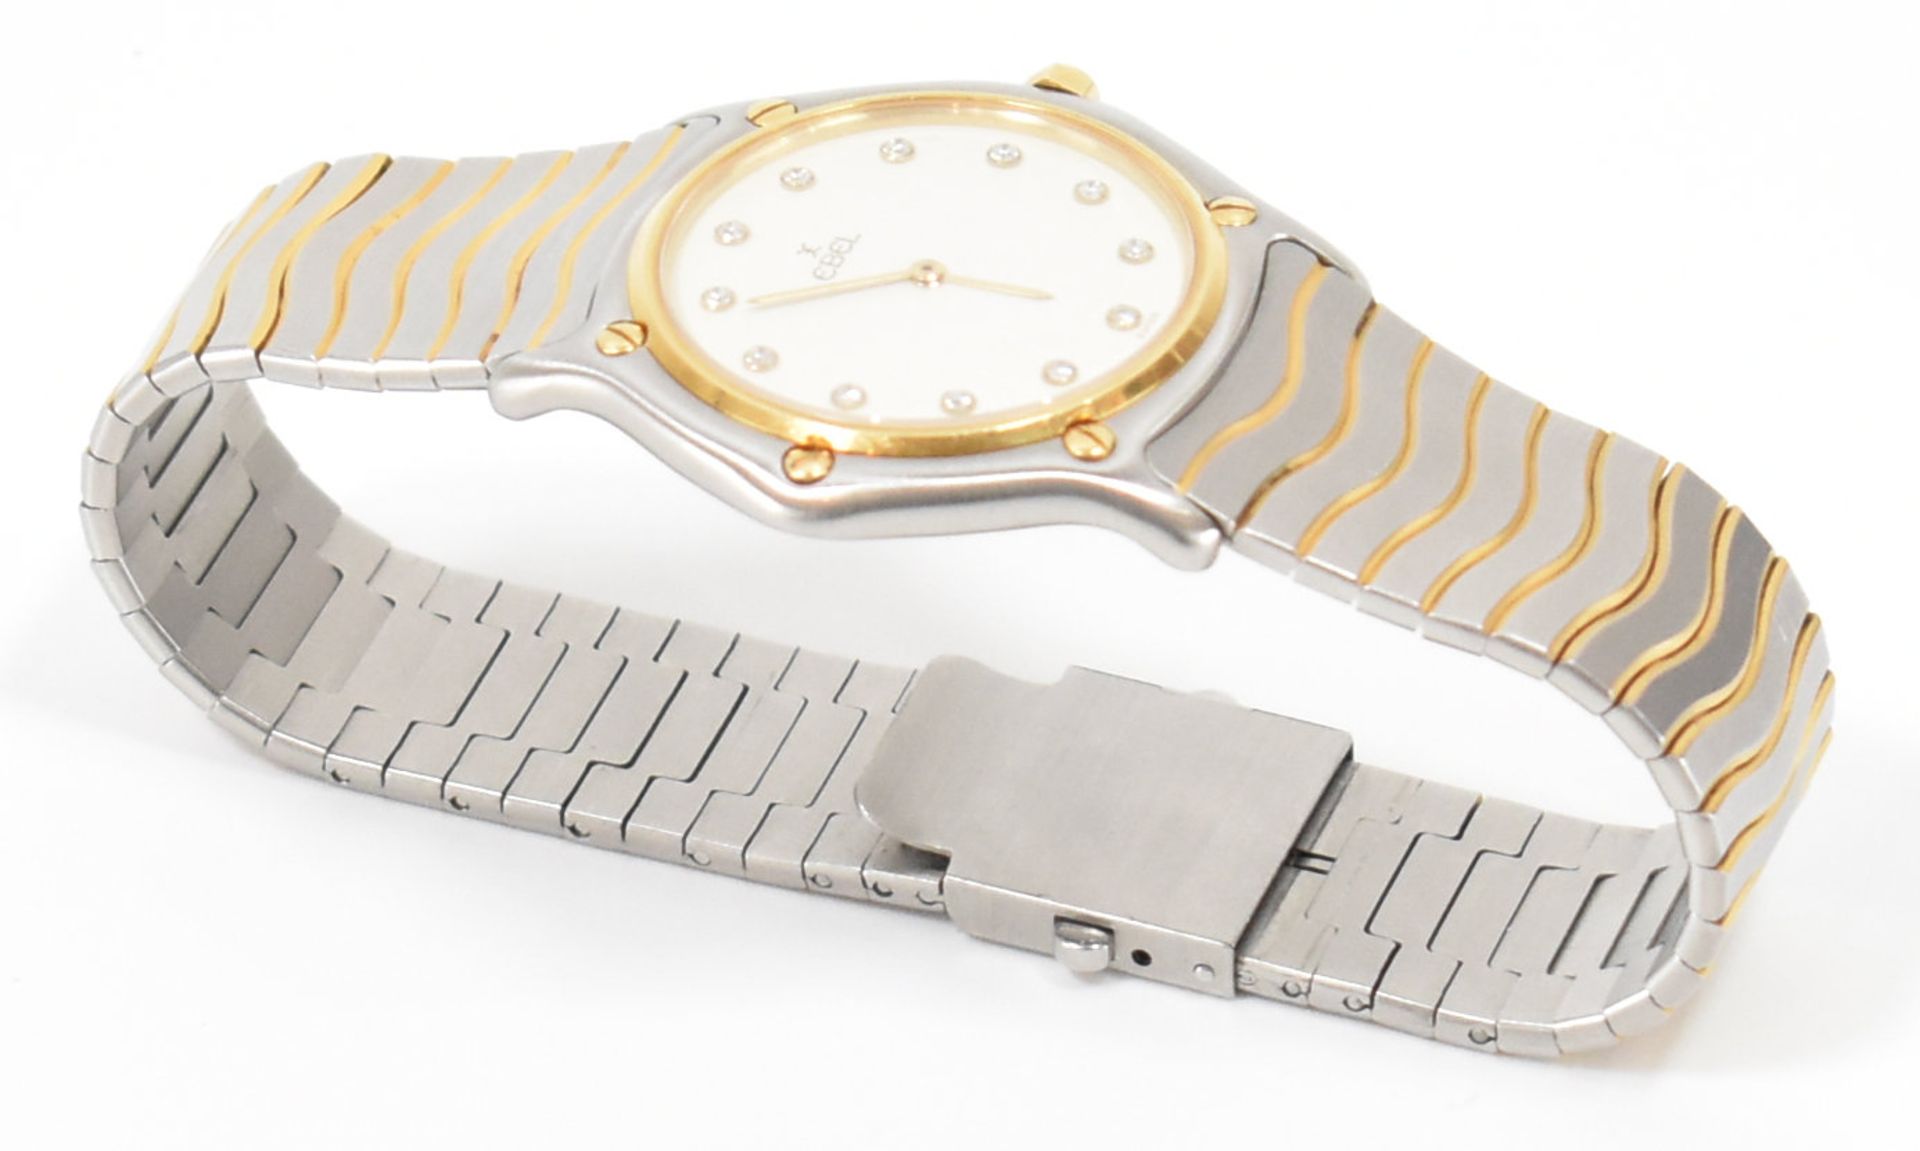 EBEL STAINLESS STEEL TWO TONE WRISTWATCH - Image 3 of 5